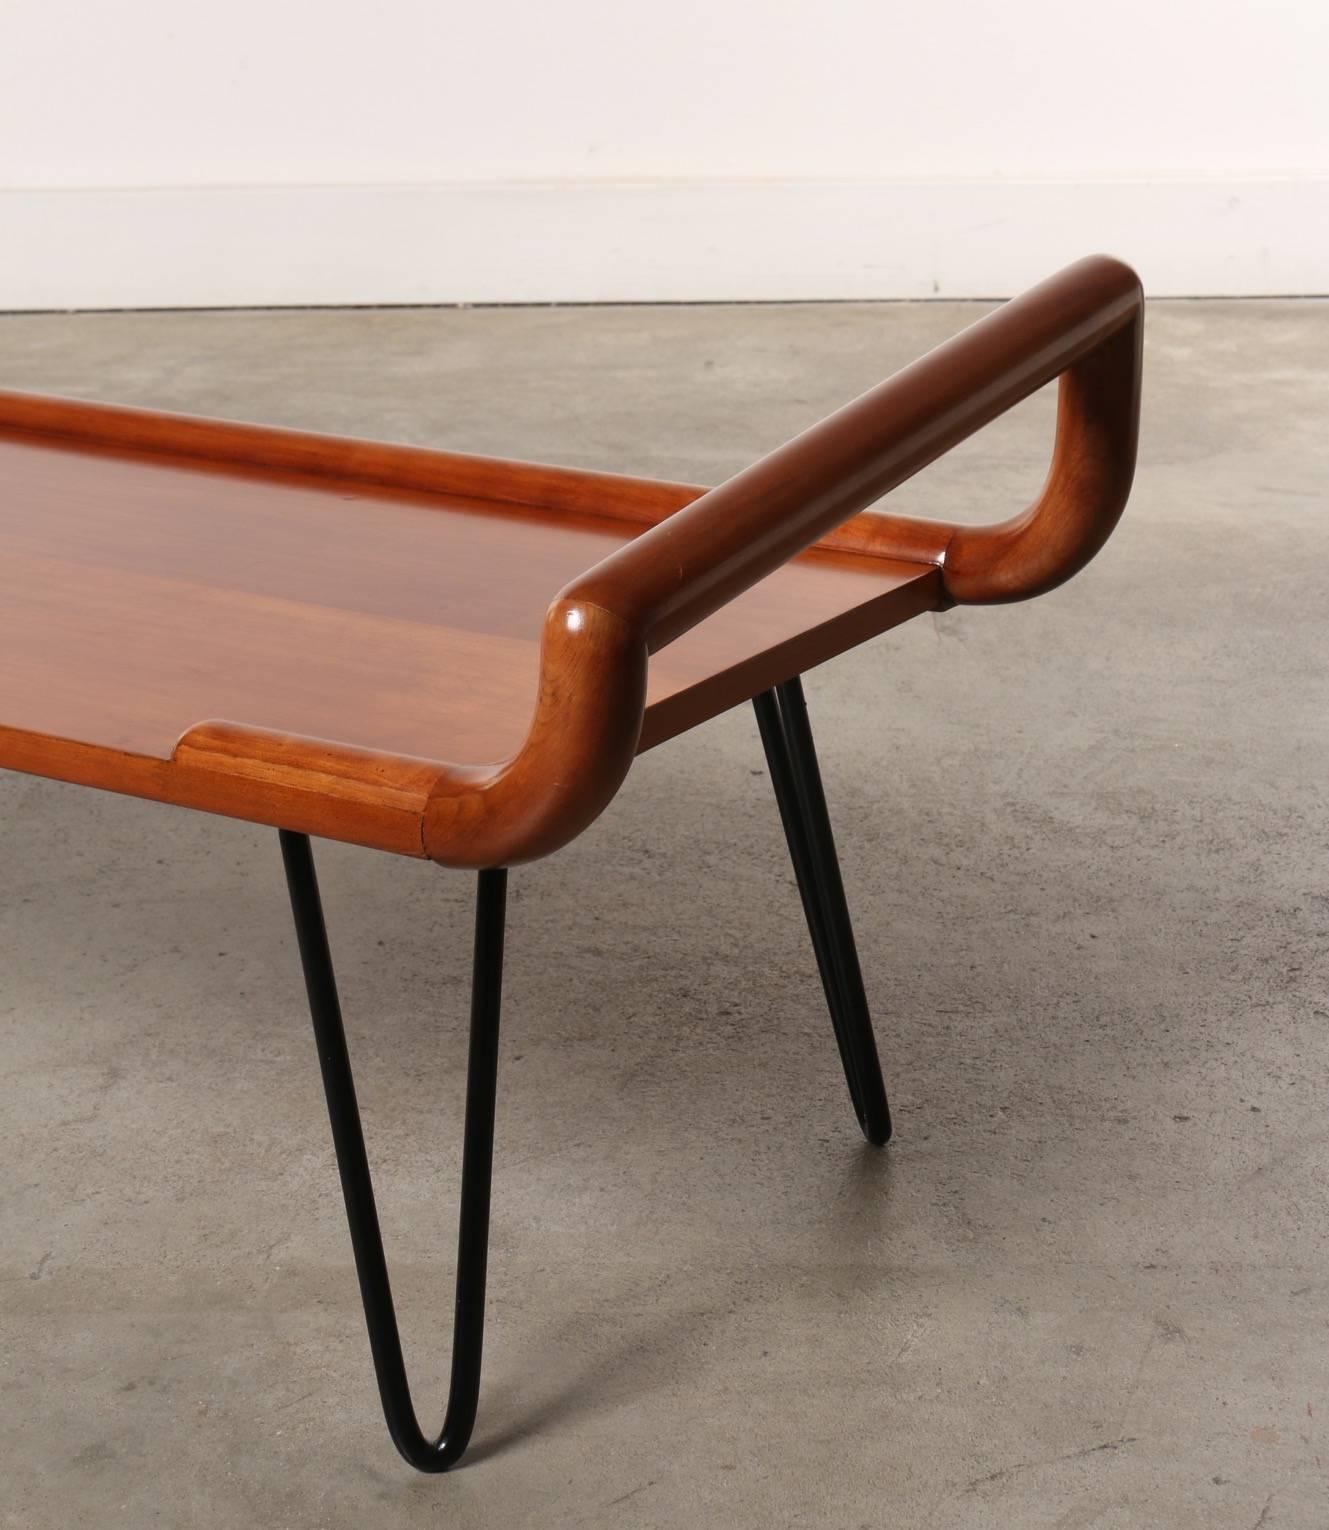 20th Century Midcentury Table or Bench with Hairpin Legs